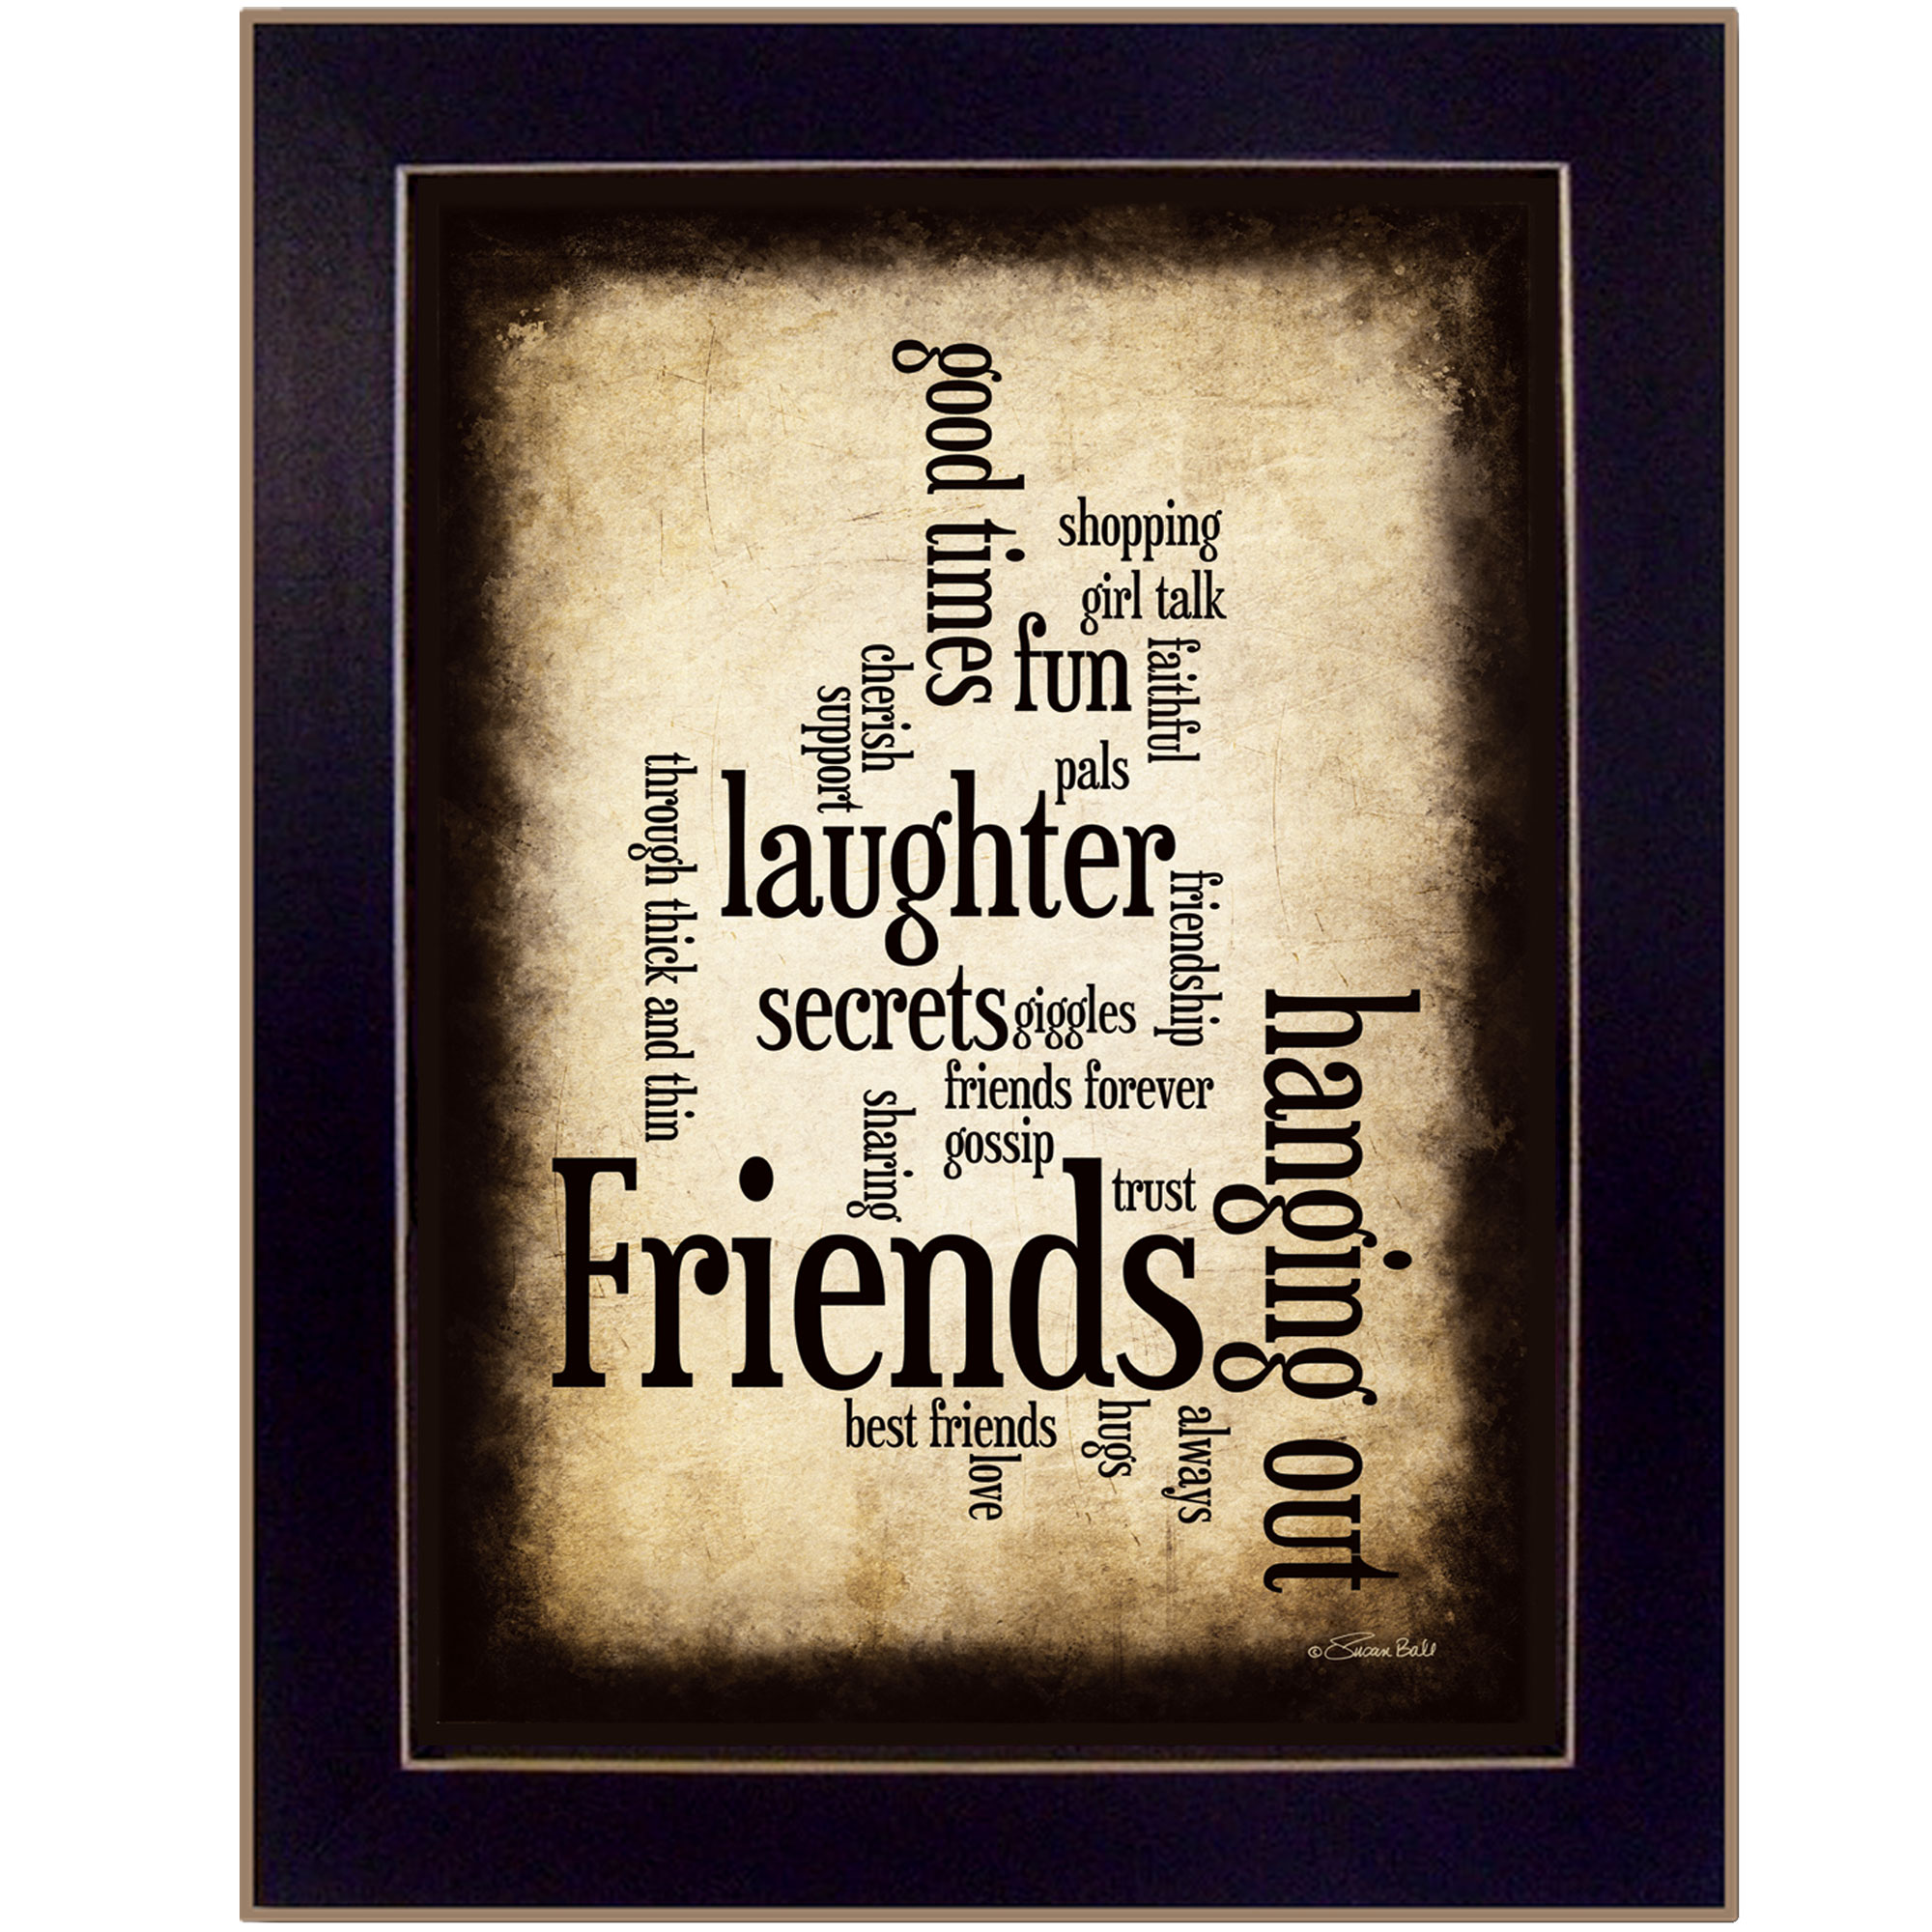 "Friends" By Susan Boyle, Printed Wall Art, Ready To Hang Framed Poster, Black Frame